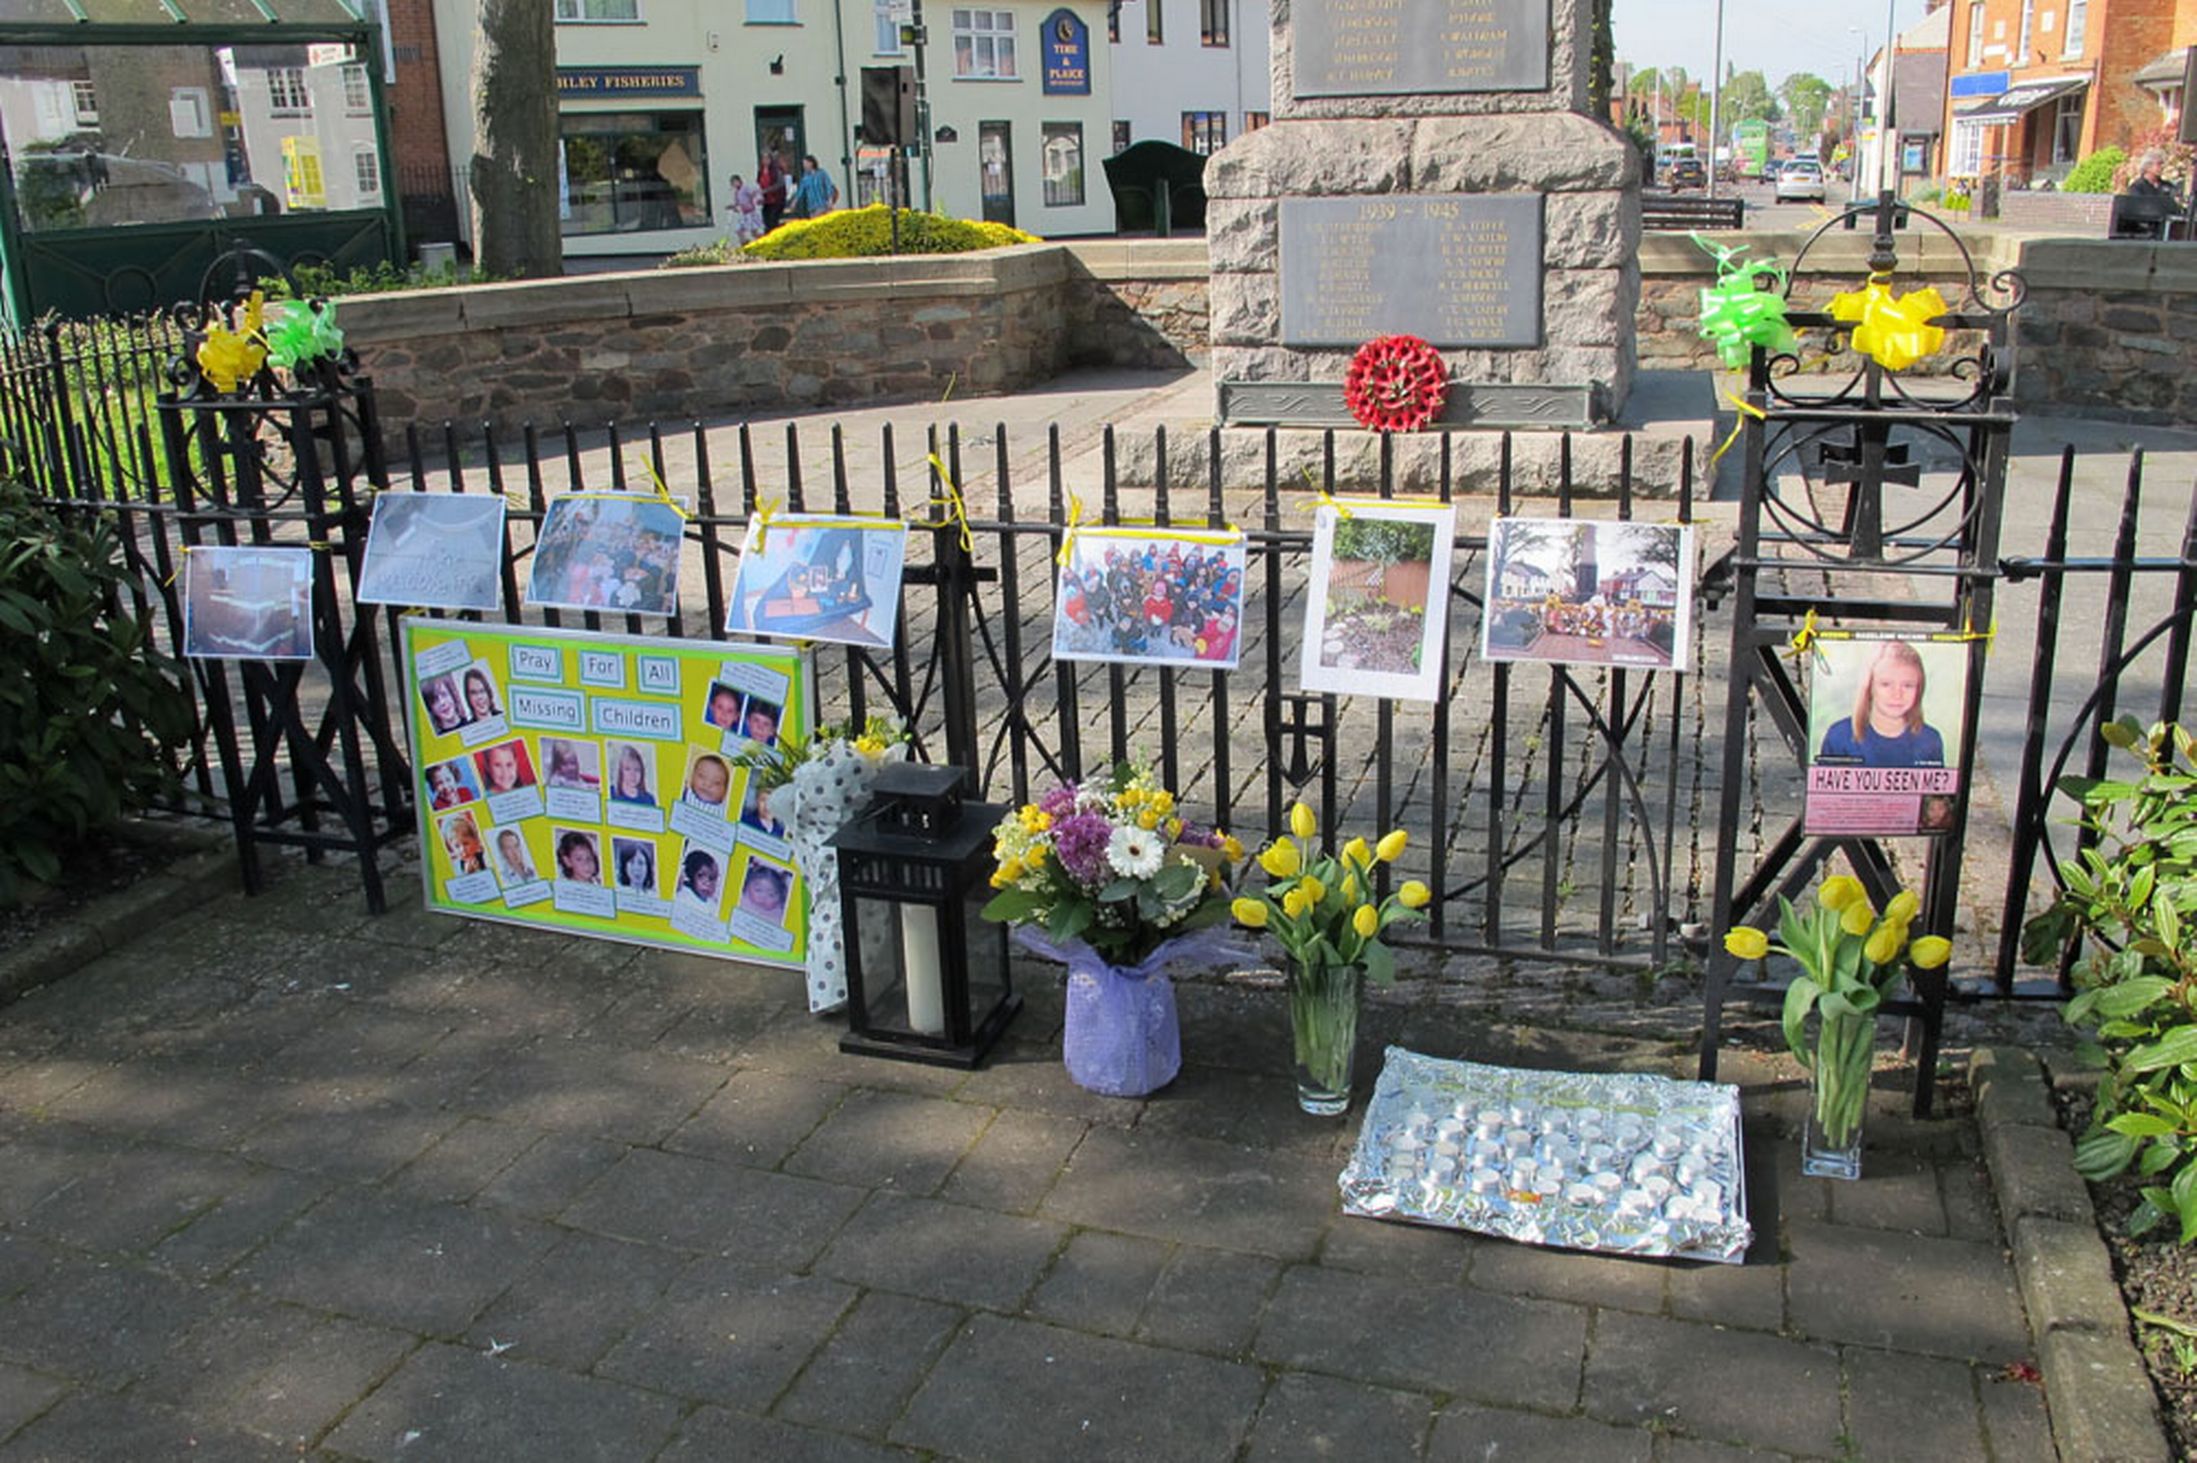 Tributes to missing Madeleine McCann, at a low-key open-air service in the centre of Rothley, Leicestershire, on the seventh anniversary of the girl's disappearance